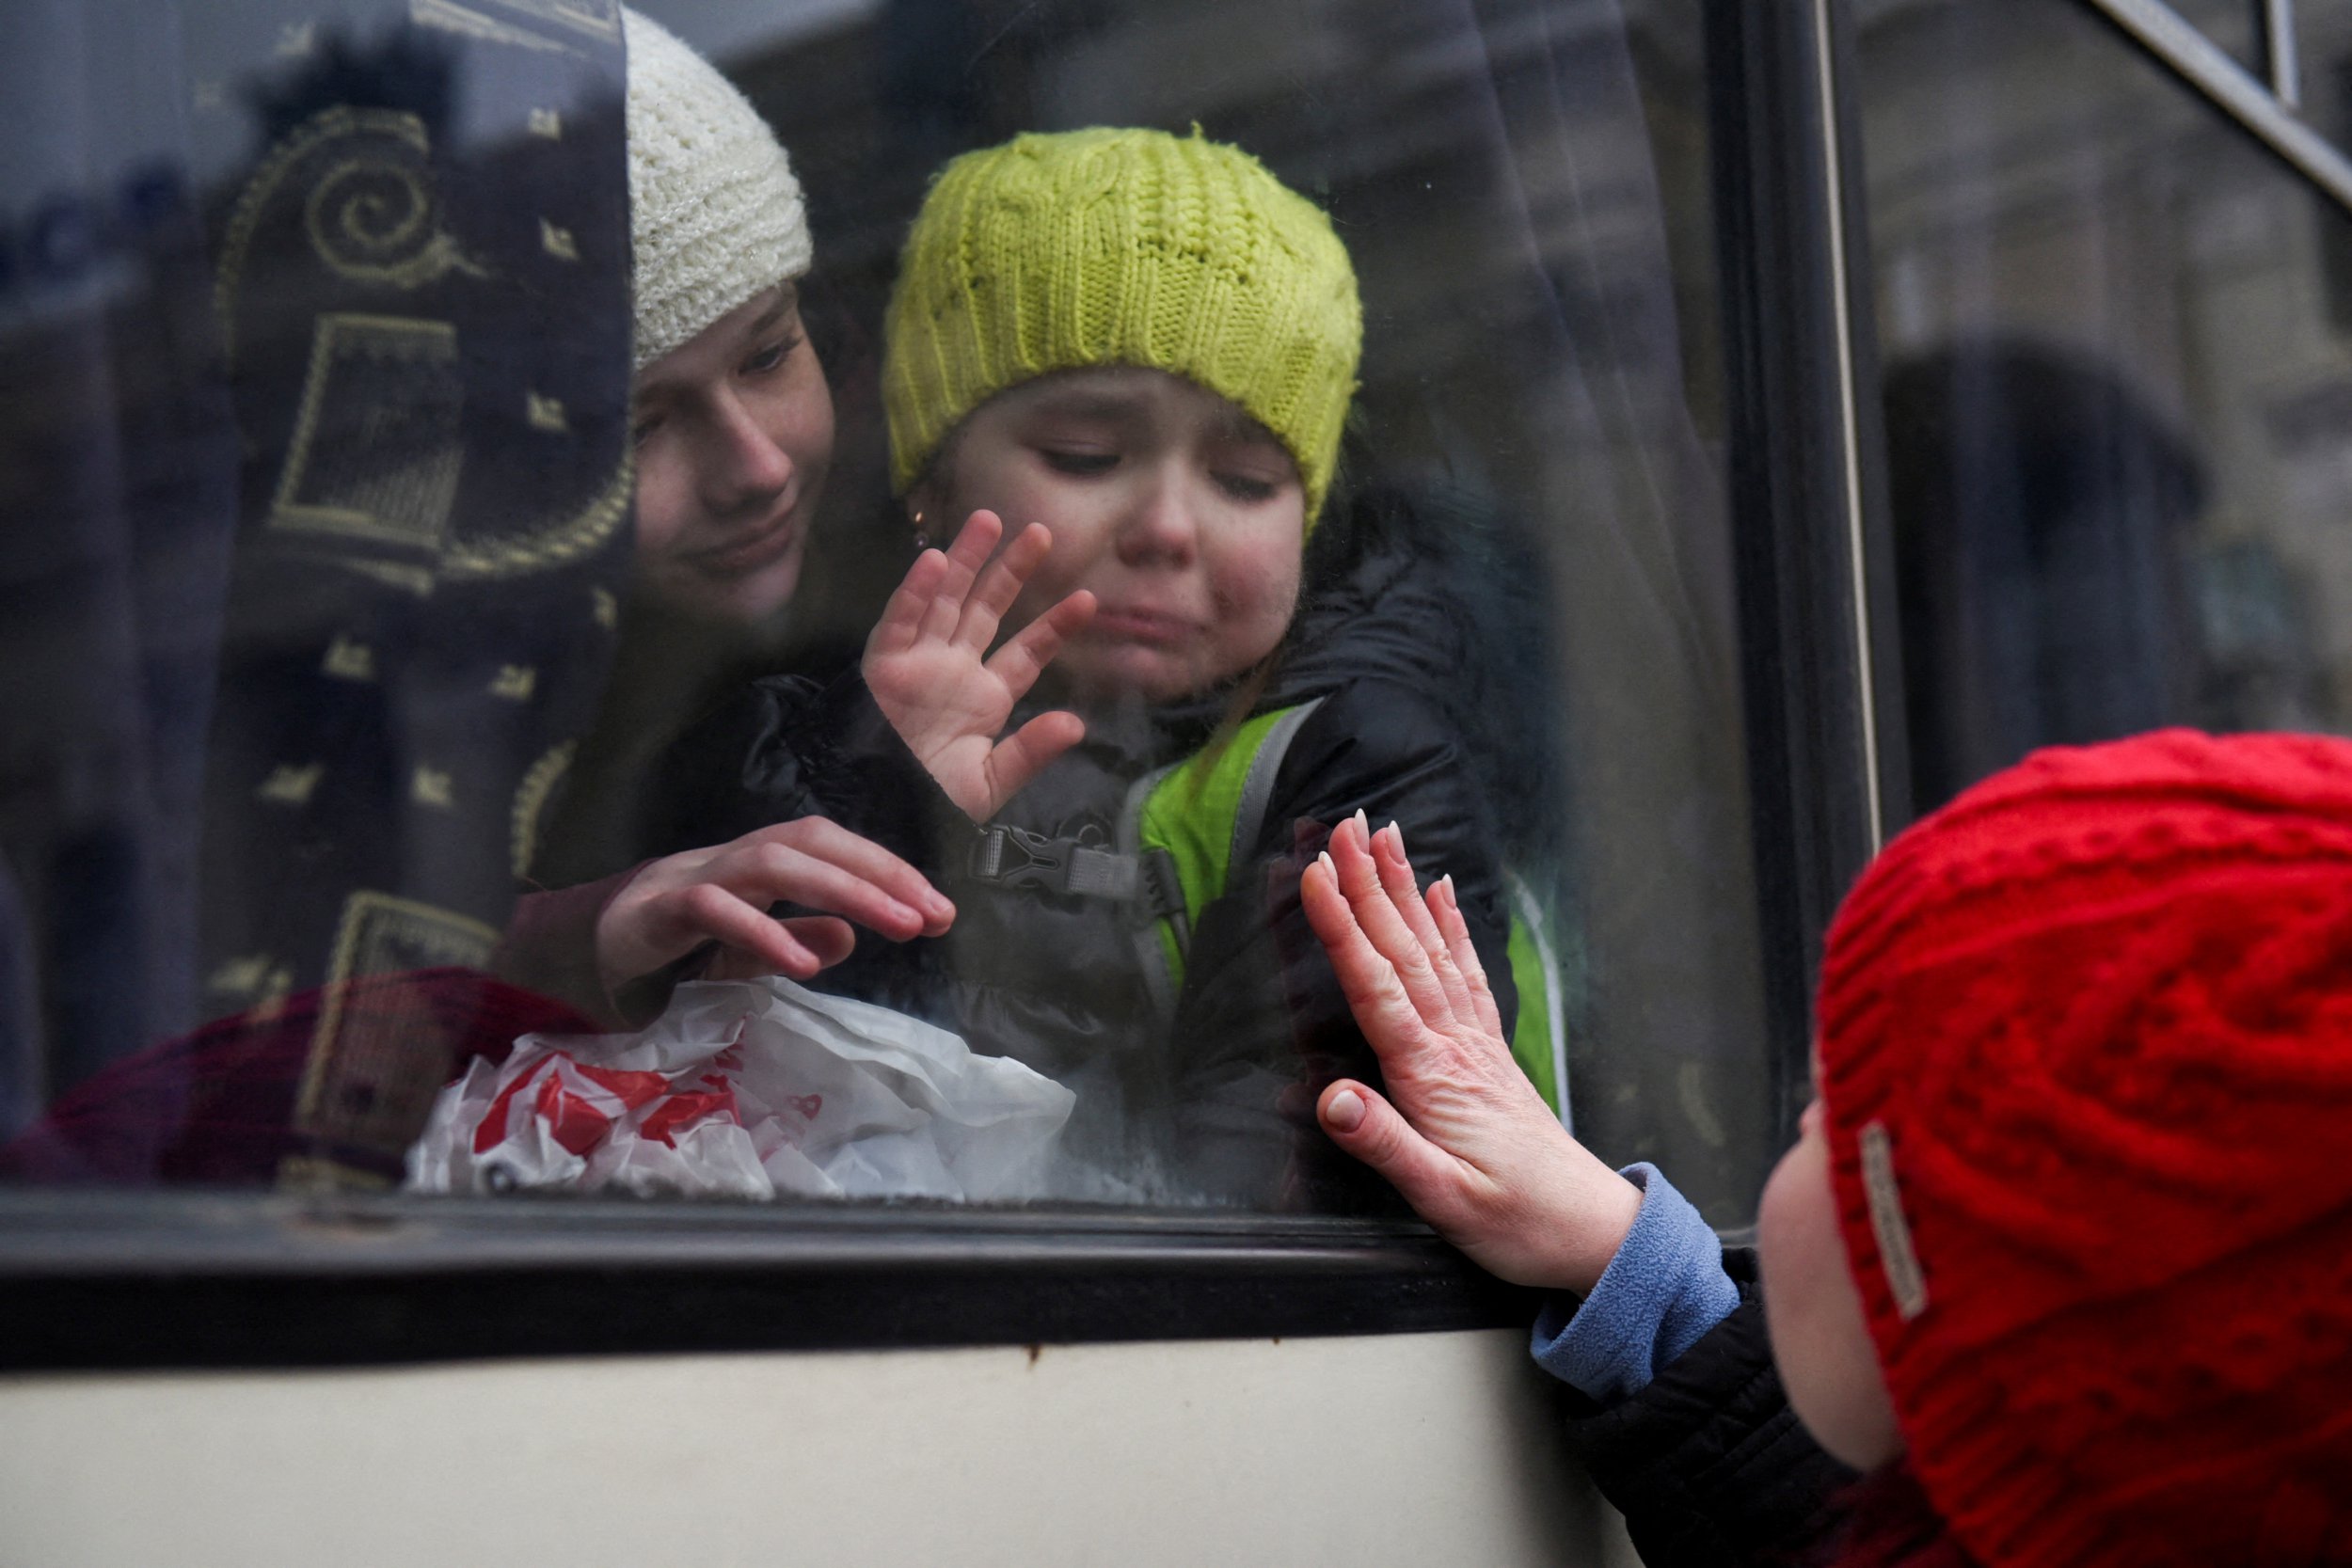 Alexandra, 12, holds her sister Esyea, 6, who cries as she waves at her mother Irina, while members of the Jewish community of Odessa board a bus to flee Russia's invasion of Ukraine, in Odessa, Ukraine, March 7, 2022. REUTERS/Alexandros Avramidis